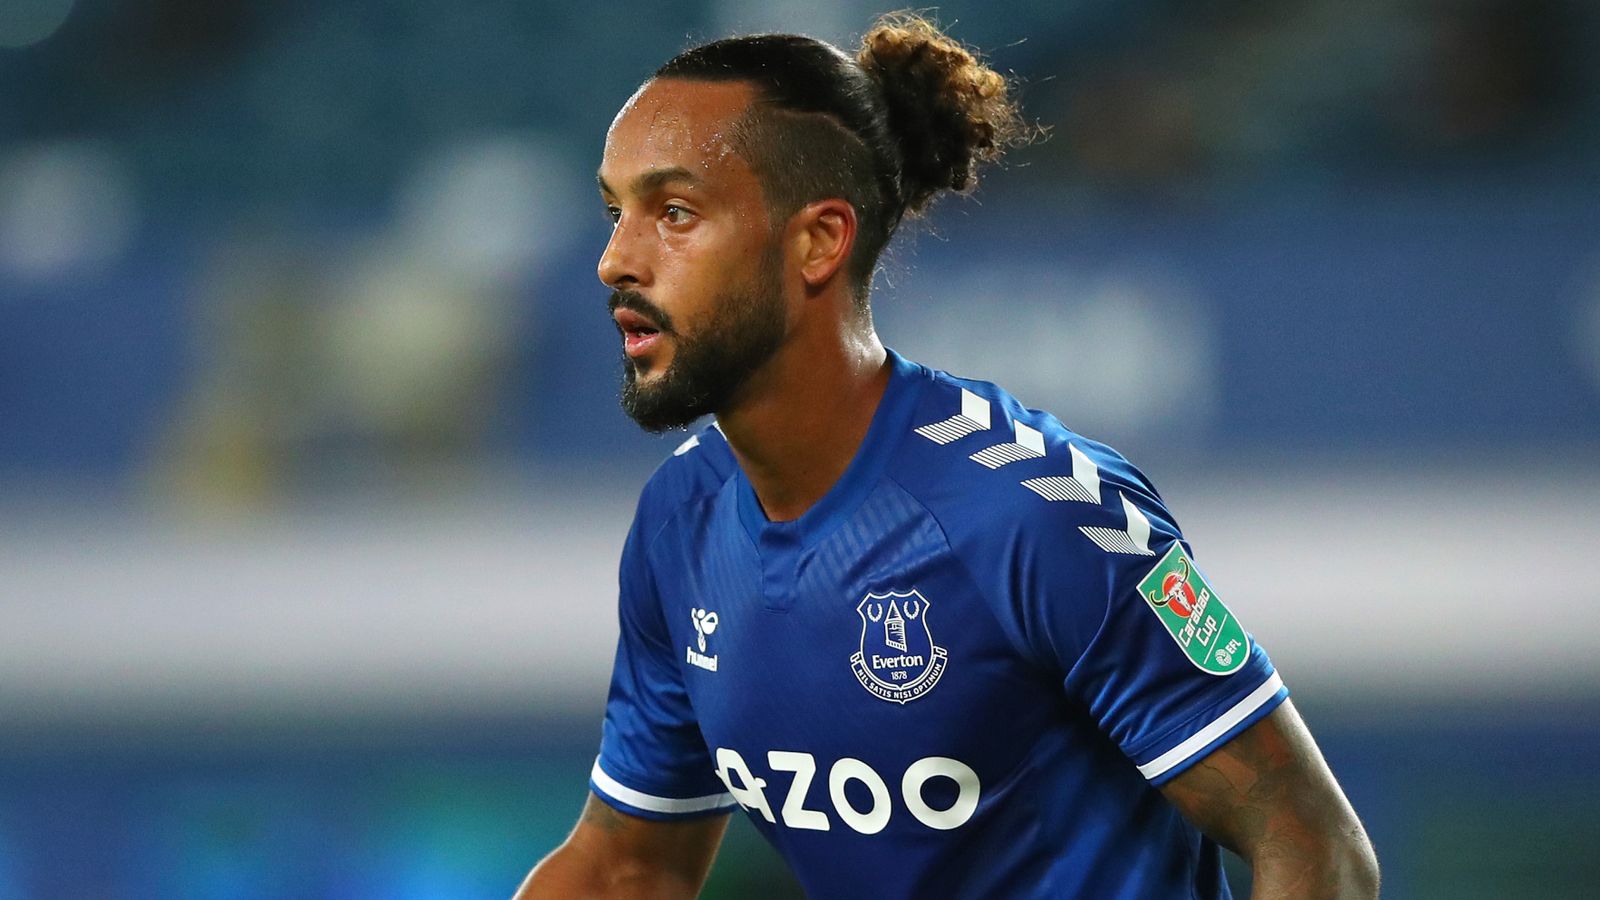 theo-walcott-southampton-close-to-agreeing-loan-deal-with-everton-for-winger